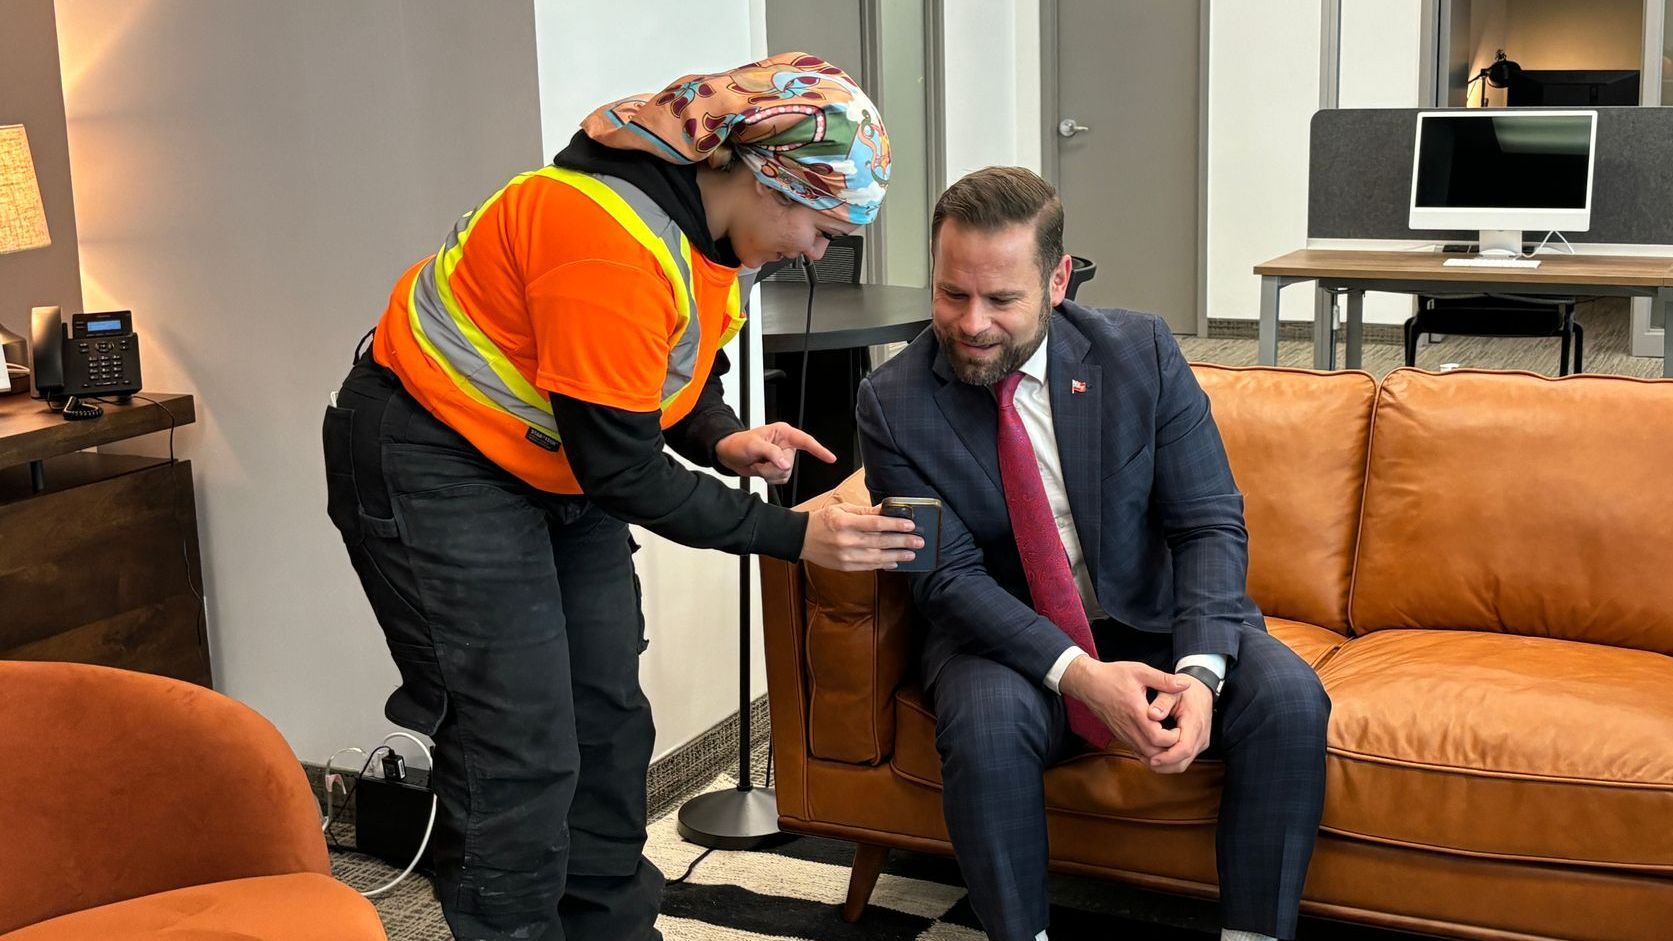 A female construction worker sharing pictures on her phone to a man in a suit and tie is sitting on a couch.